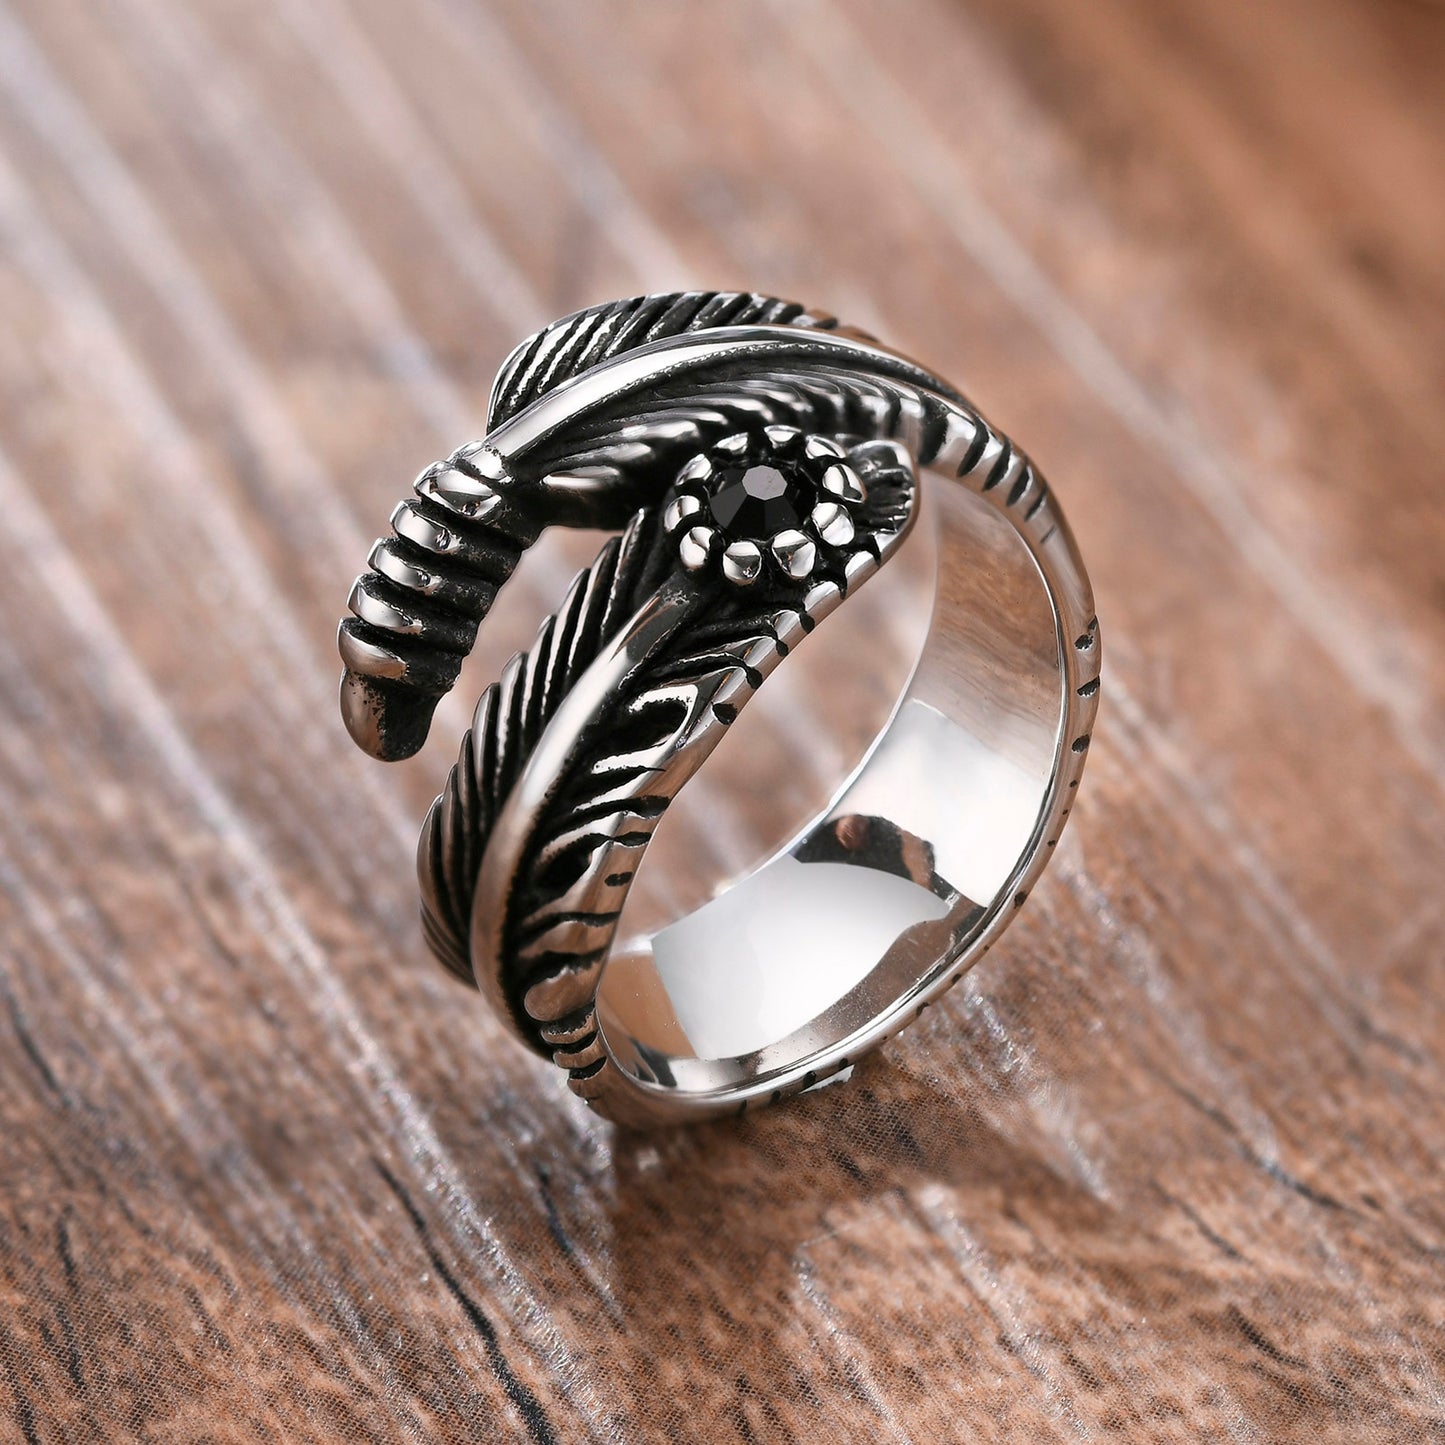 Feather Wraparound Ring with Black Gemstone - Stainless Steel Silver - Unisex - Adjustable